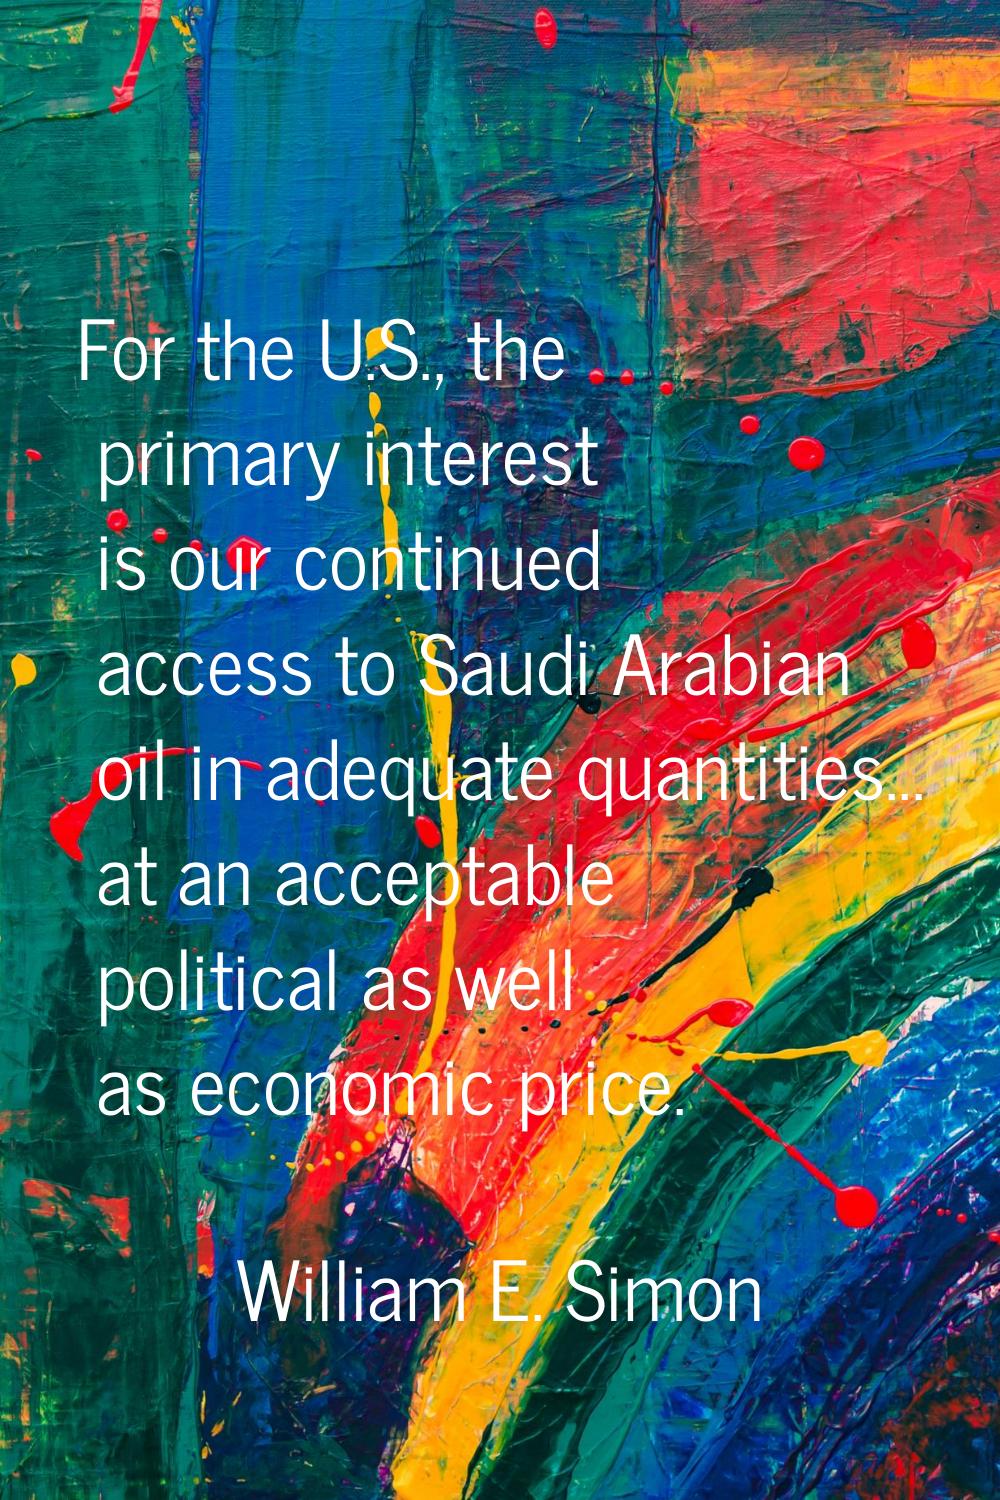 For the U.S., the primary interest is our continued access to Saudi Arabian oil in adequate quantit